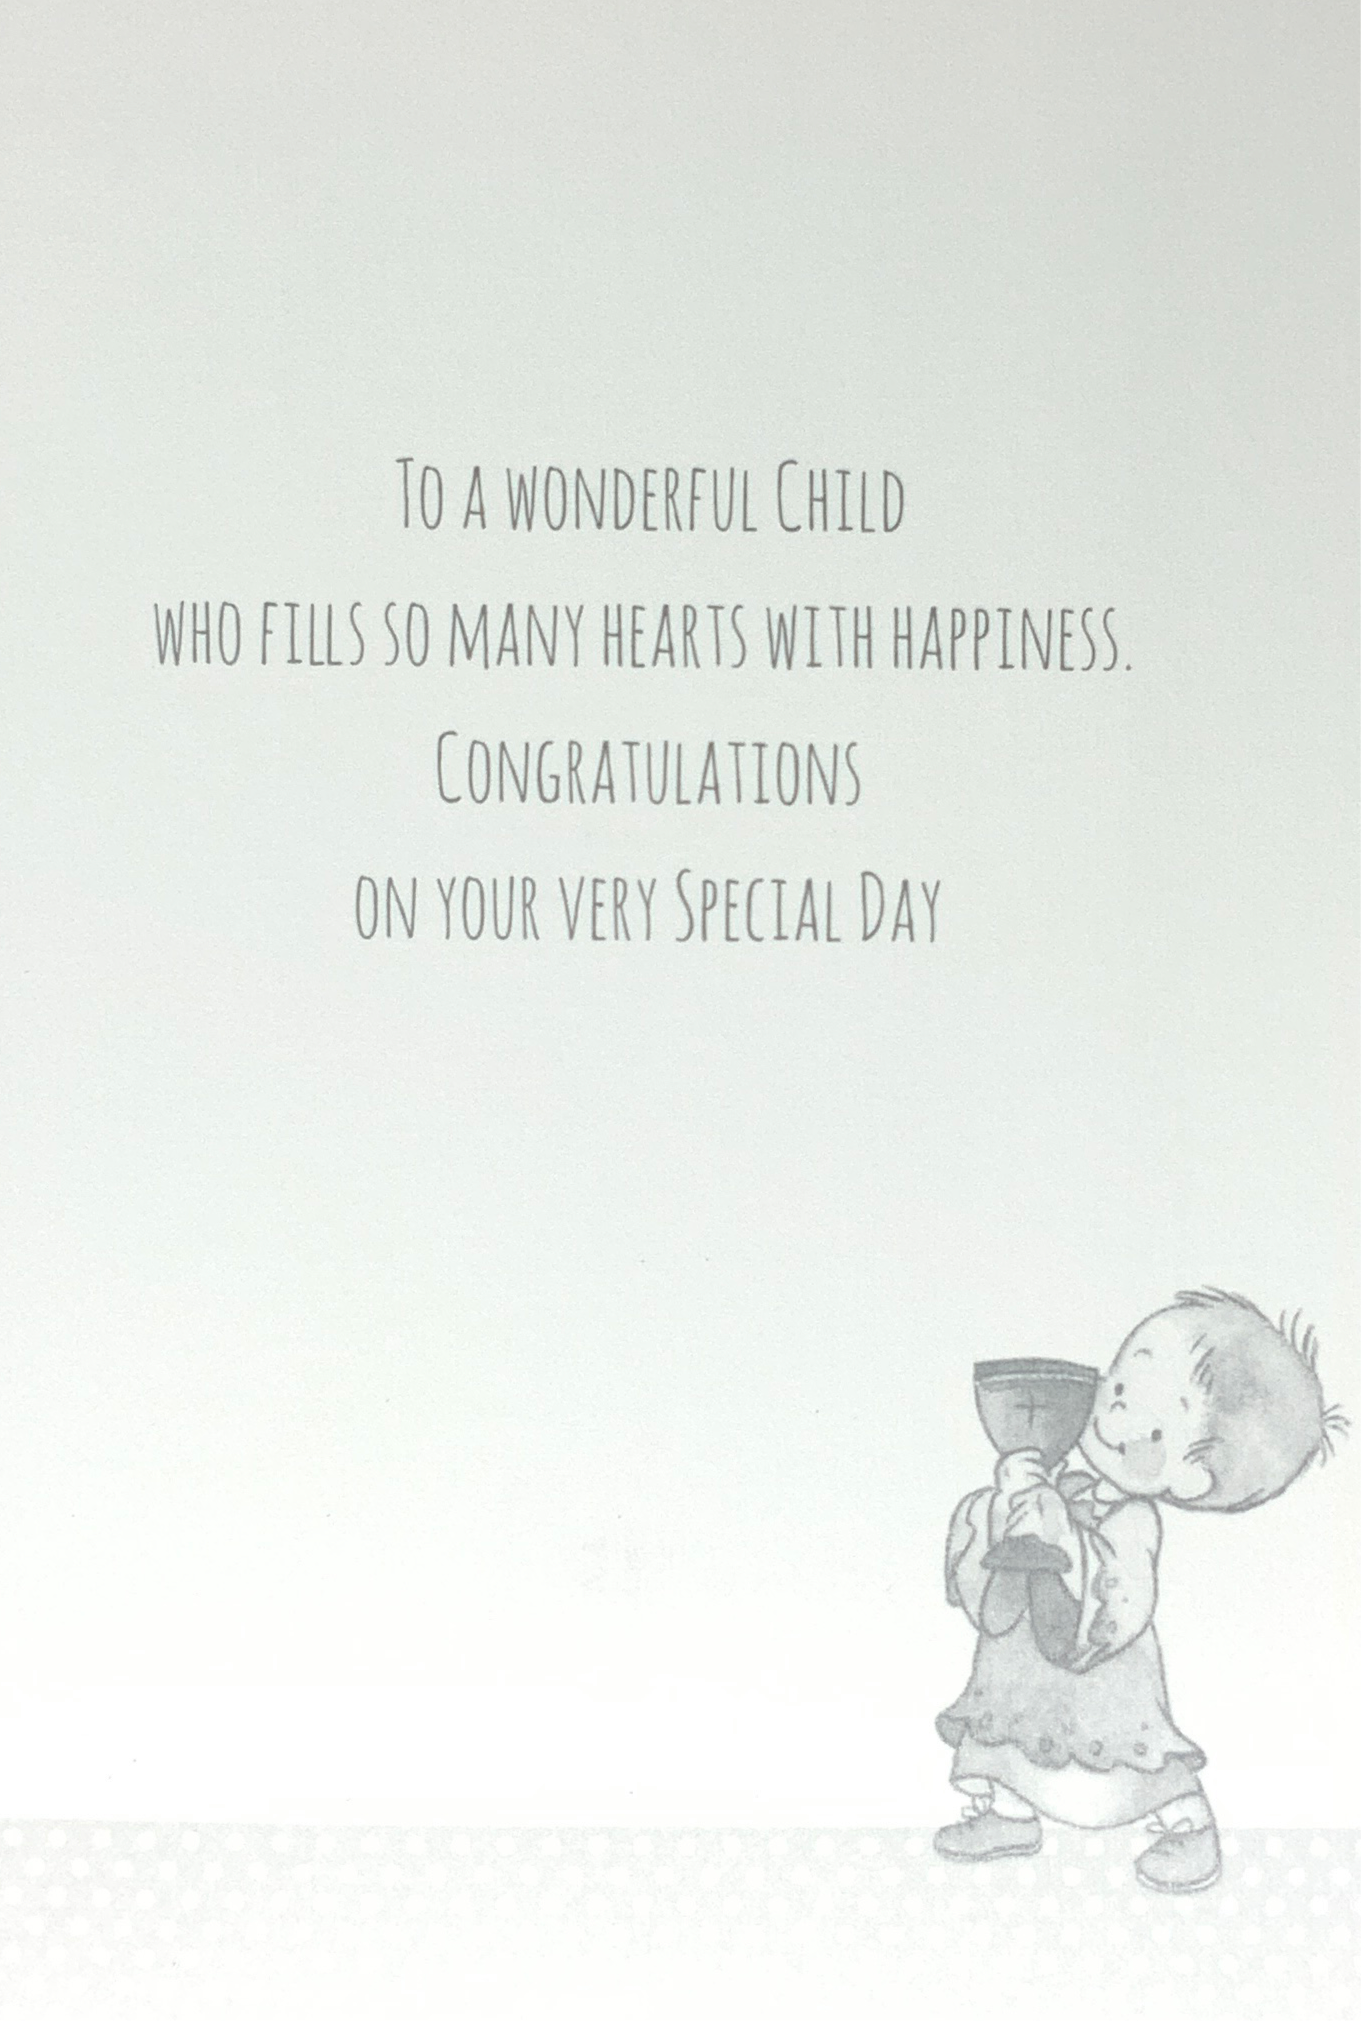 Communion Card - To A Special Nephew